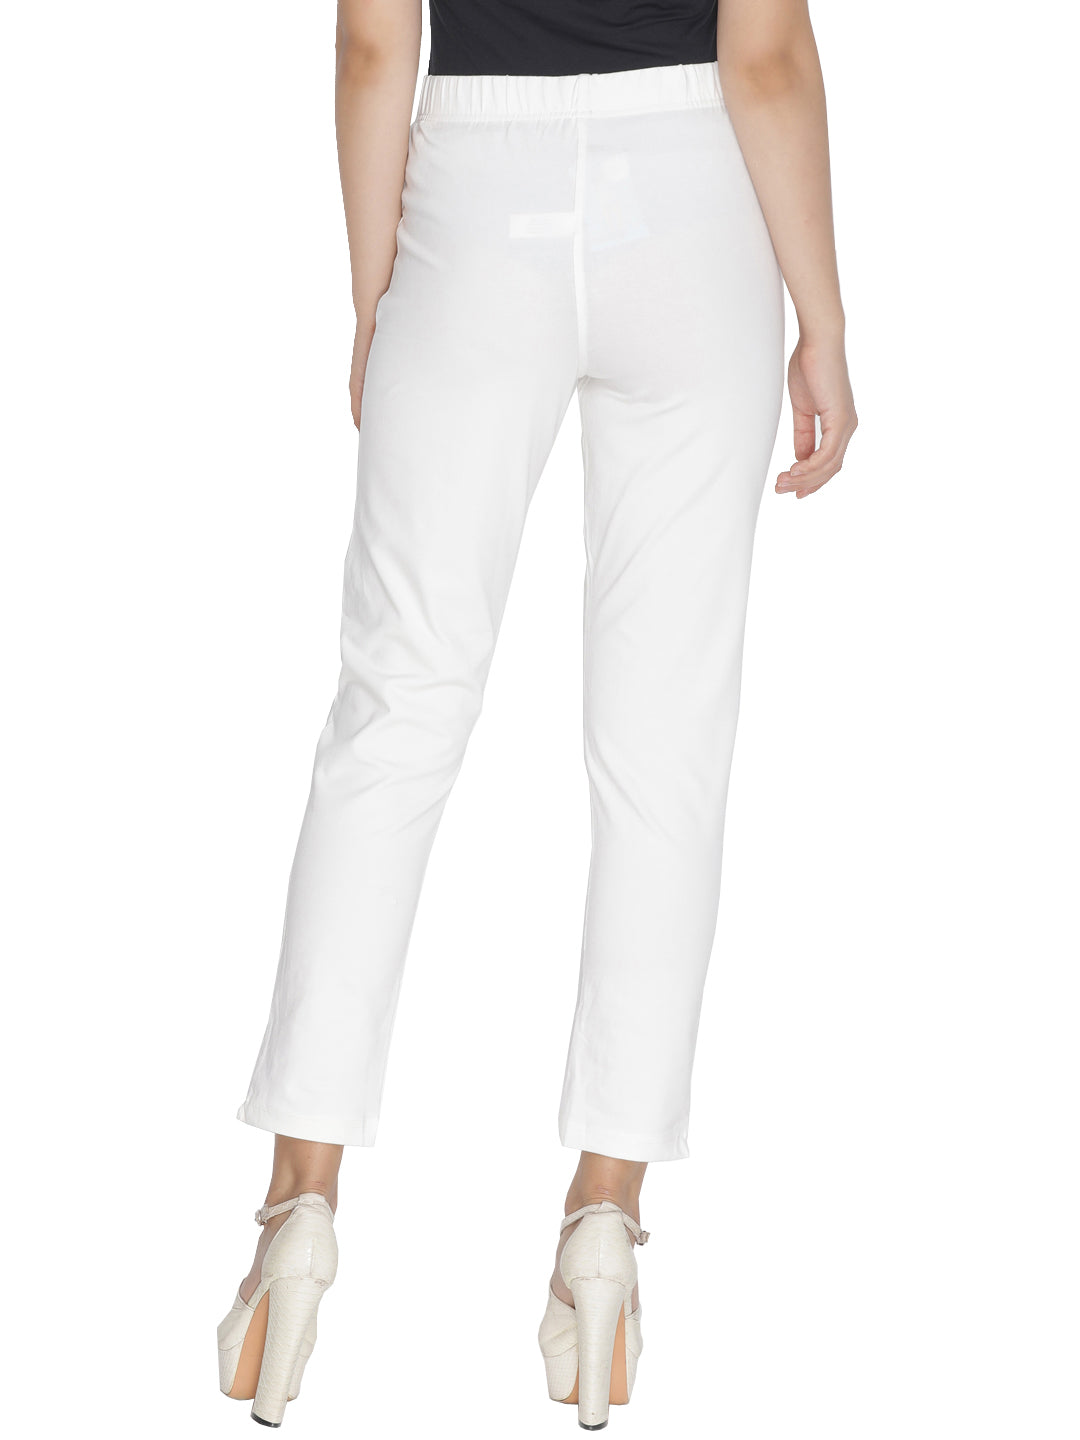 Buy White Trousers  Pants for Women by SELVIA Online  Ajiocom